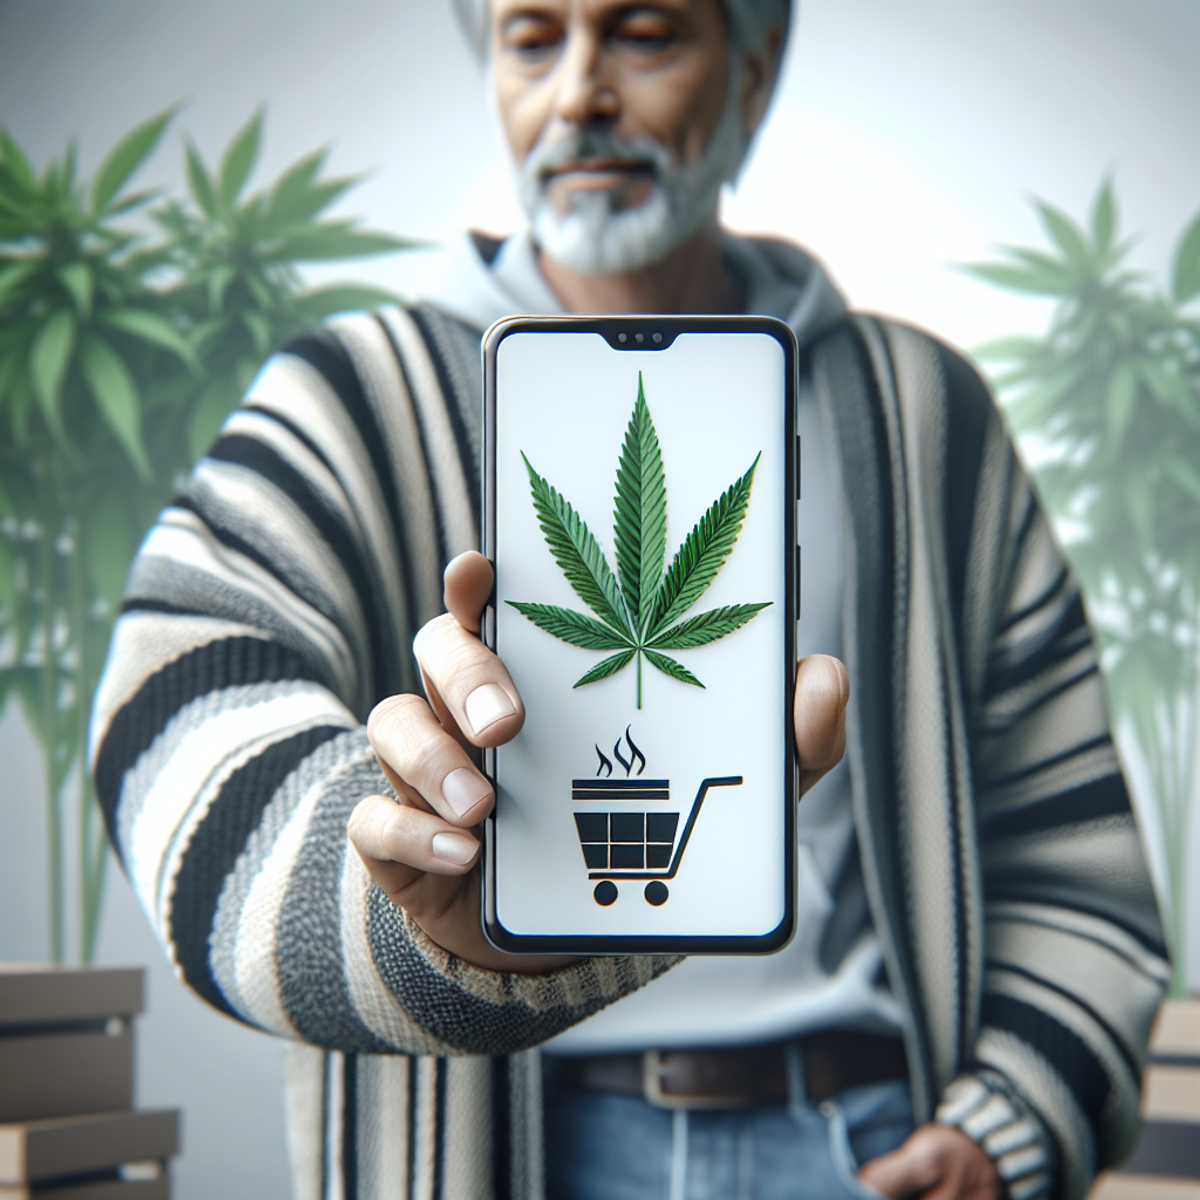 A Hispanic person in casual attire holding a smartphone displaying a cannabis leaf.